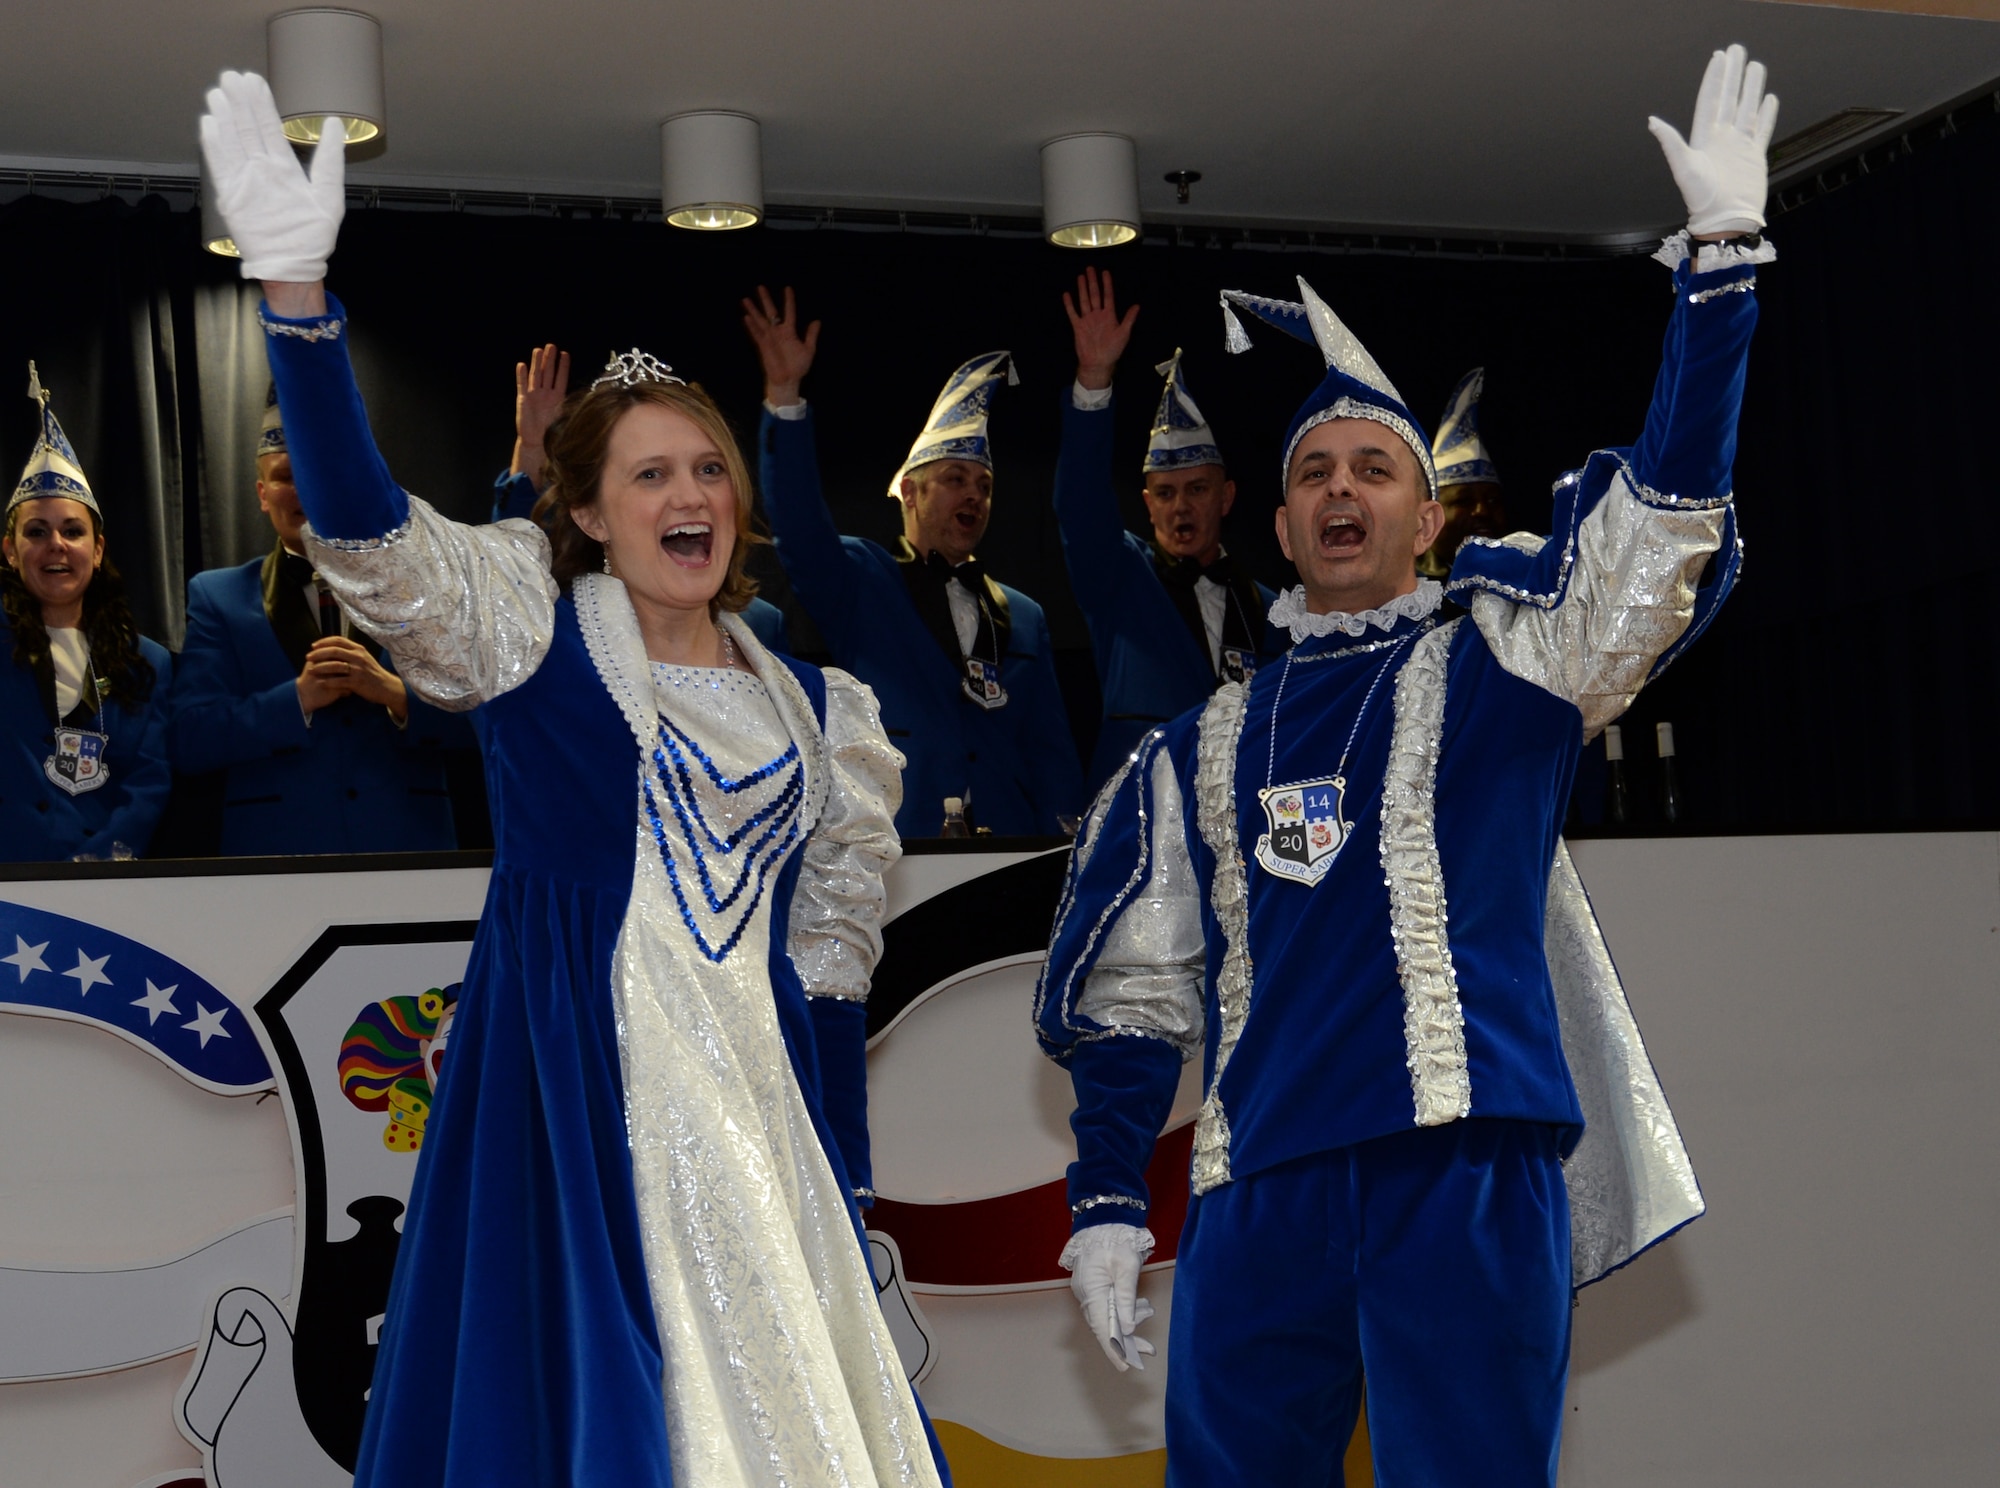 U.S. Air Force Col. David Julazadeh, commander of the 52nd Fighter Wing, right, waves to a crowd alongside his wife, Kate,  during the inaugural Saber Kappensitzung  at Club Eifel on Spangdahlem Air Base, Germany, Feb. 28, 2014. The Julazadehs served as the prince and princess of the Kappensitzung court as well as the host for the evening’s festivities.  (U.S. Air Force photo by Staff Sgt. Joe W. McFadden/Released) 